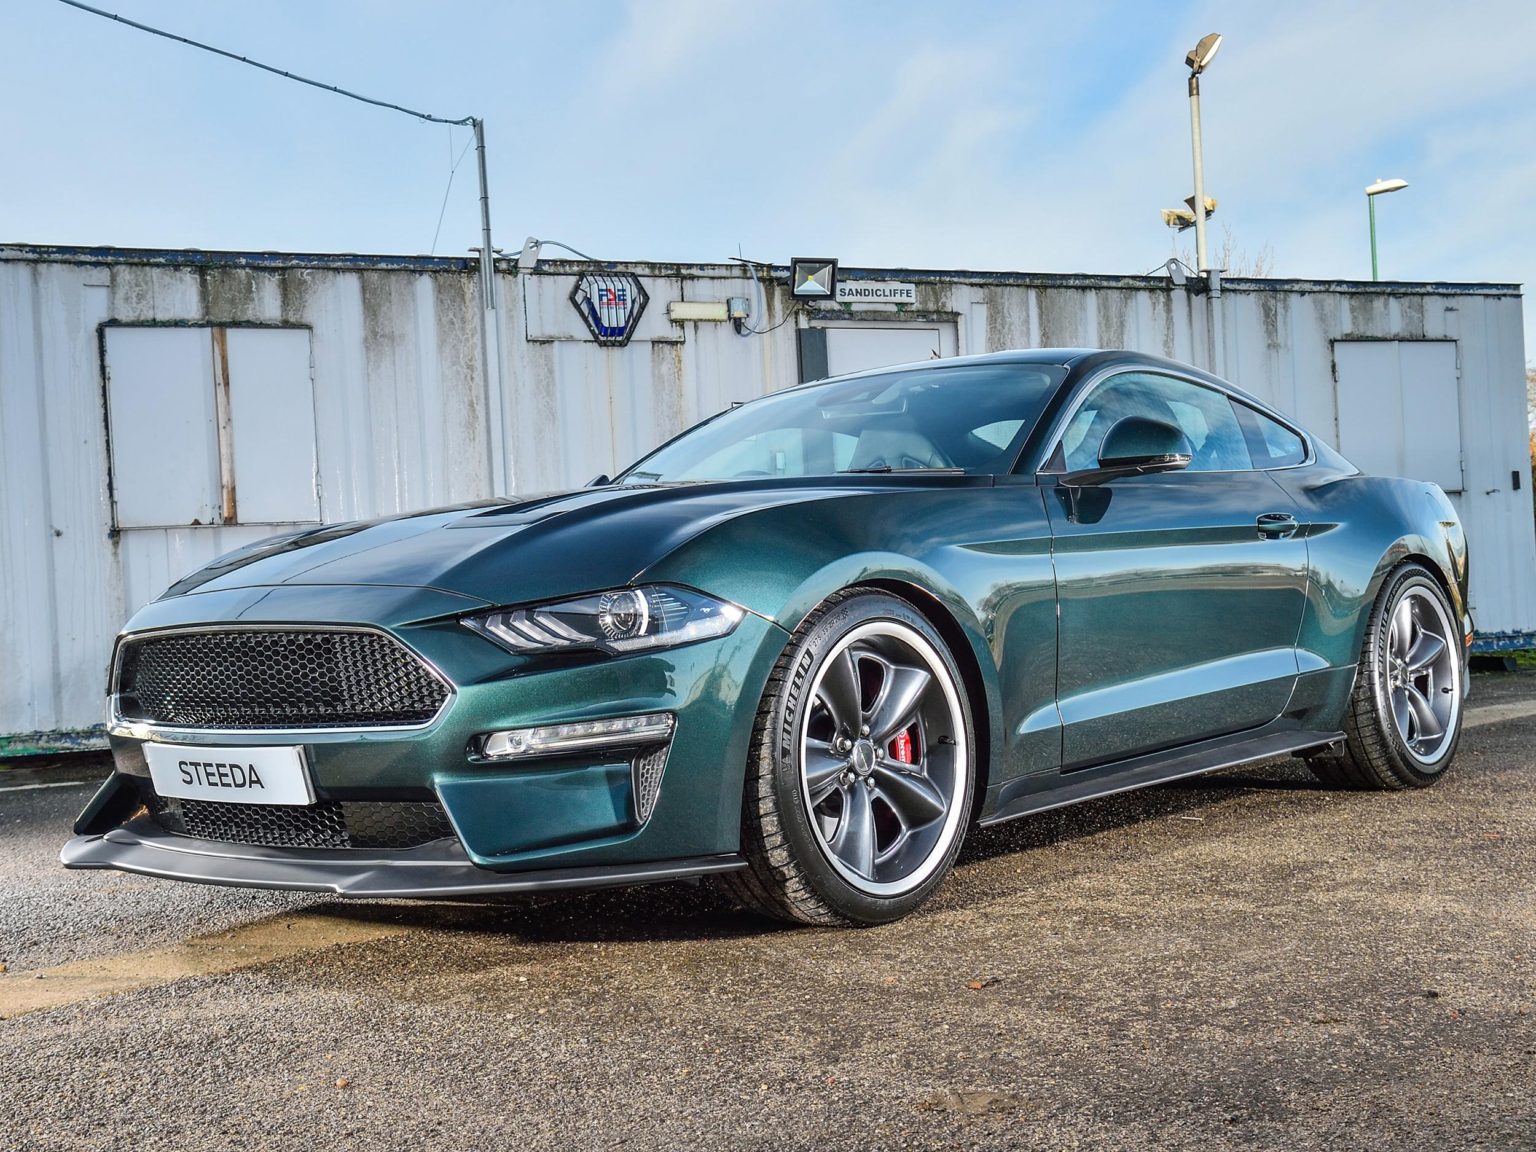 Just 300 of the Steeda Steve McQueen Limited Edition Bullitt Mustangs will be made.